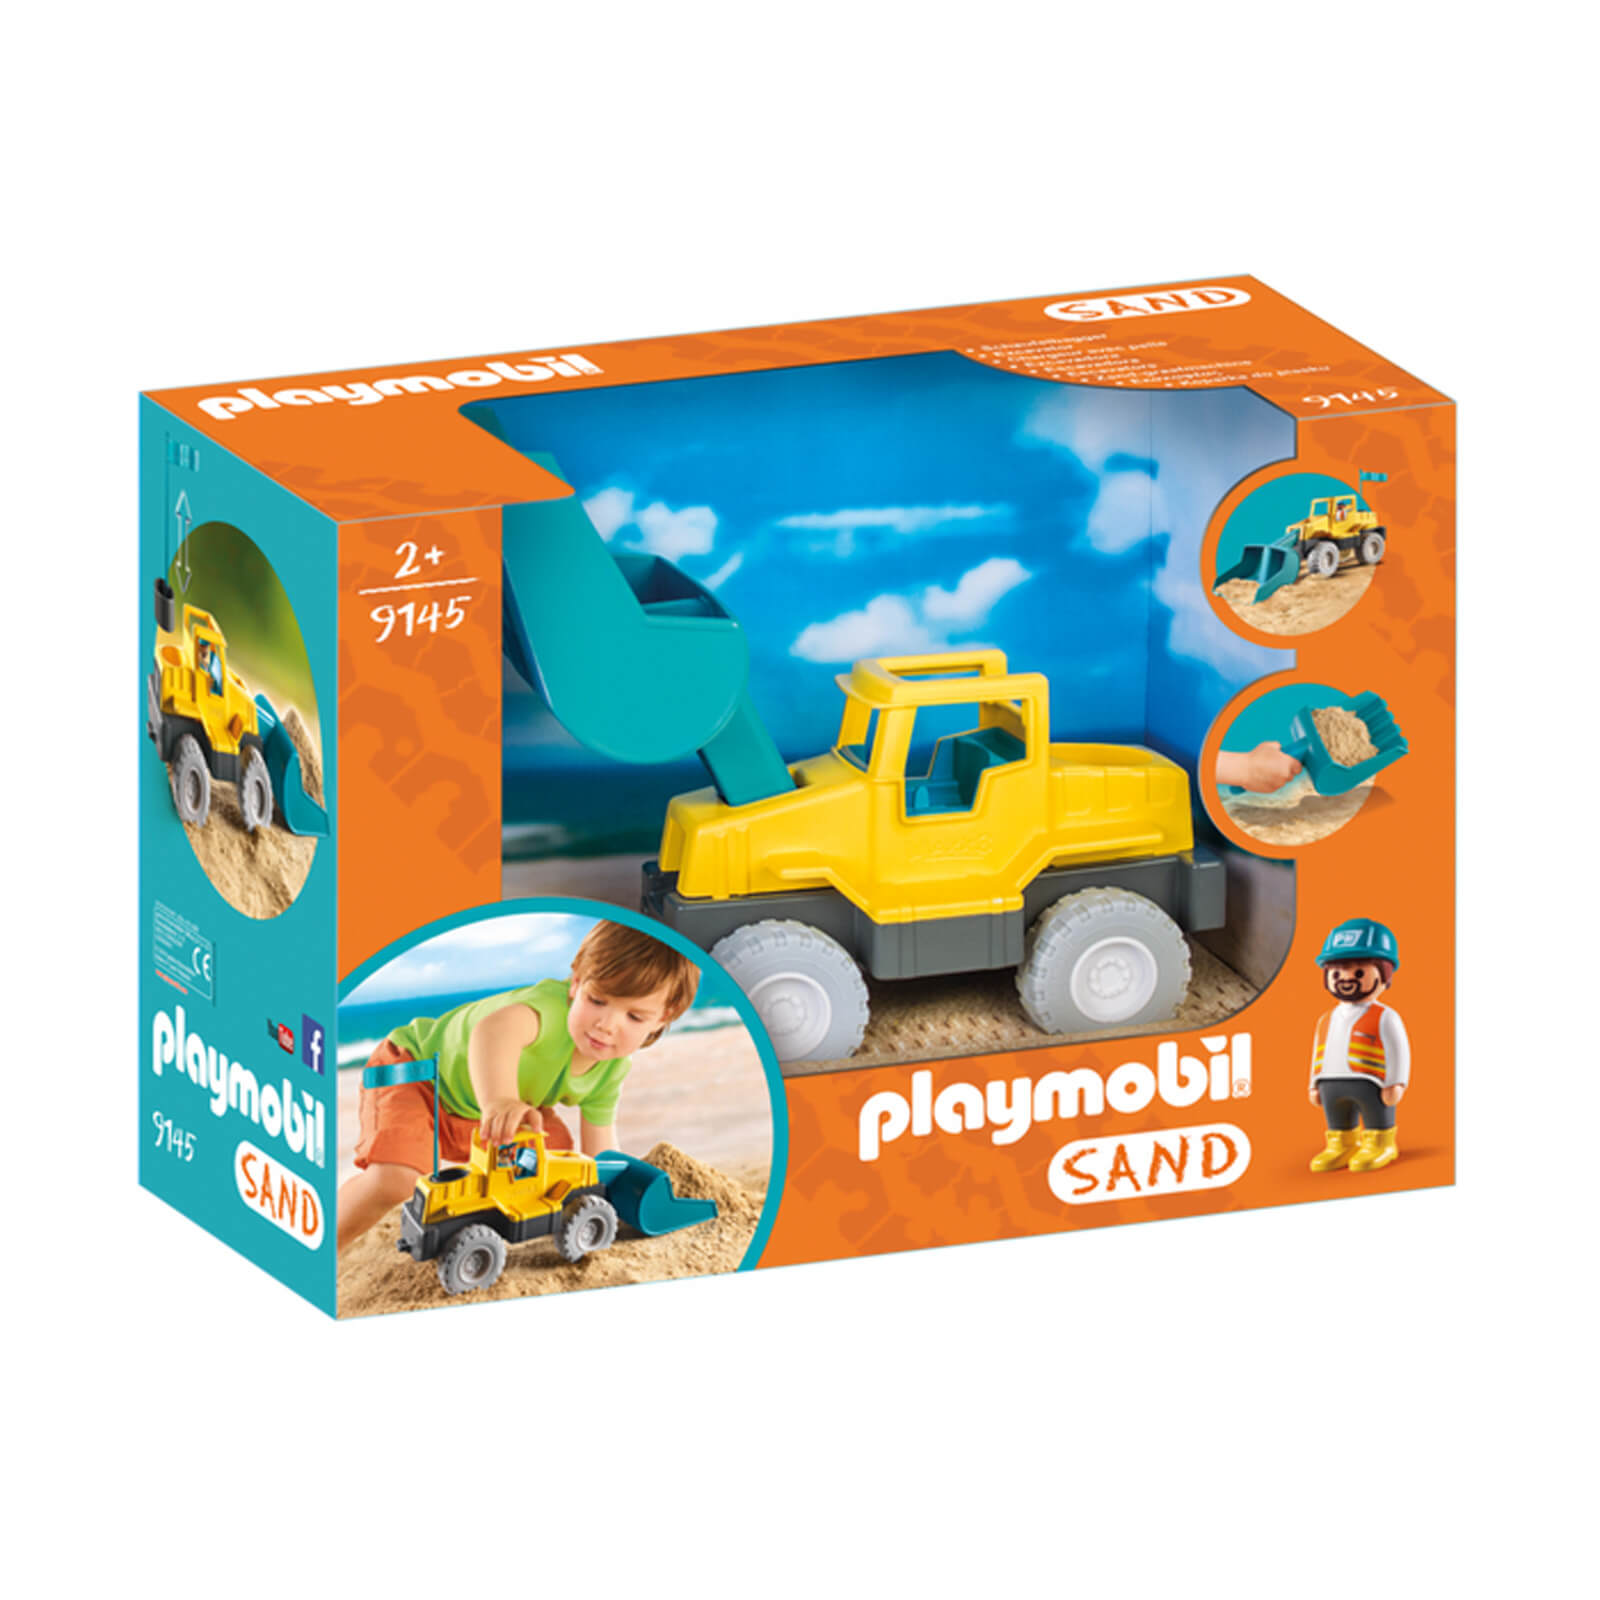 Playmobil Sand Excavator with Removable Shovel (9145)